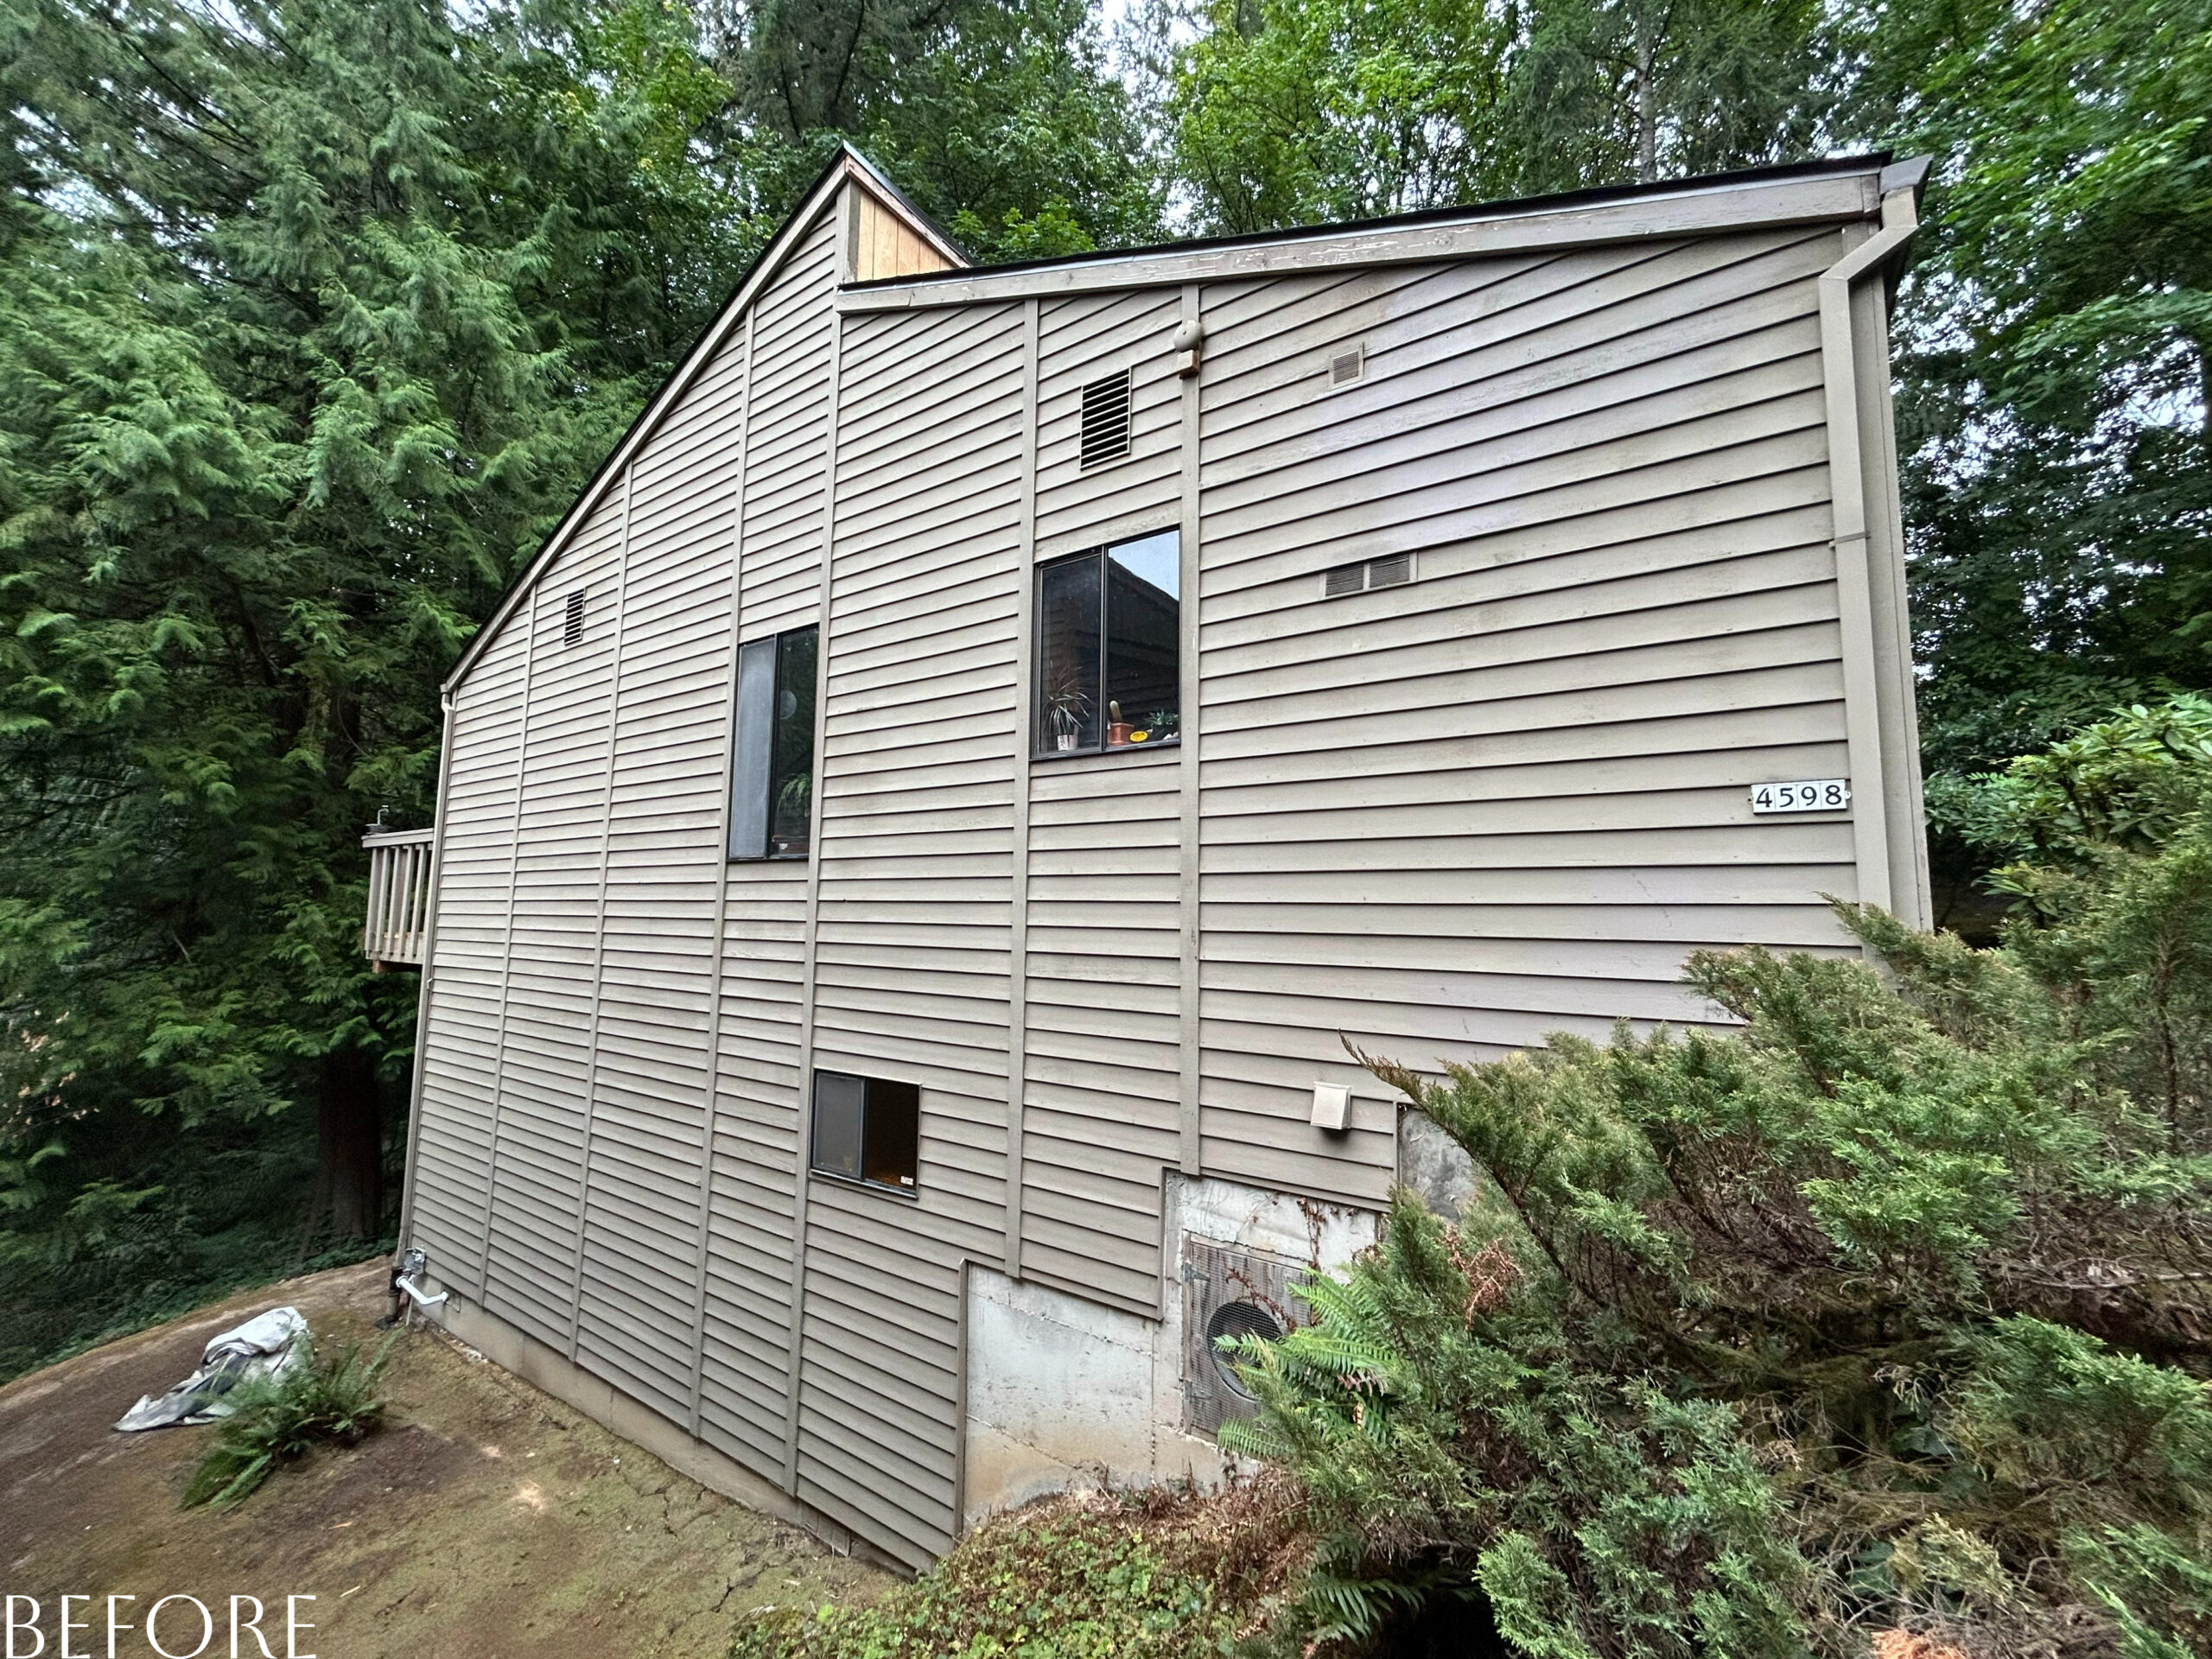 A Portland home in the woods is getting a fresh feel with a new exterior paint job.